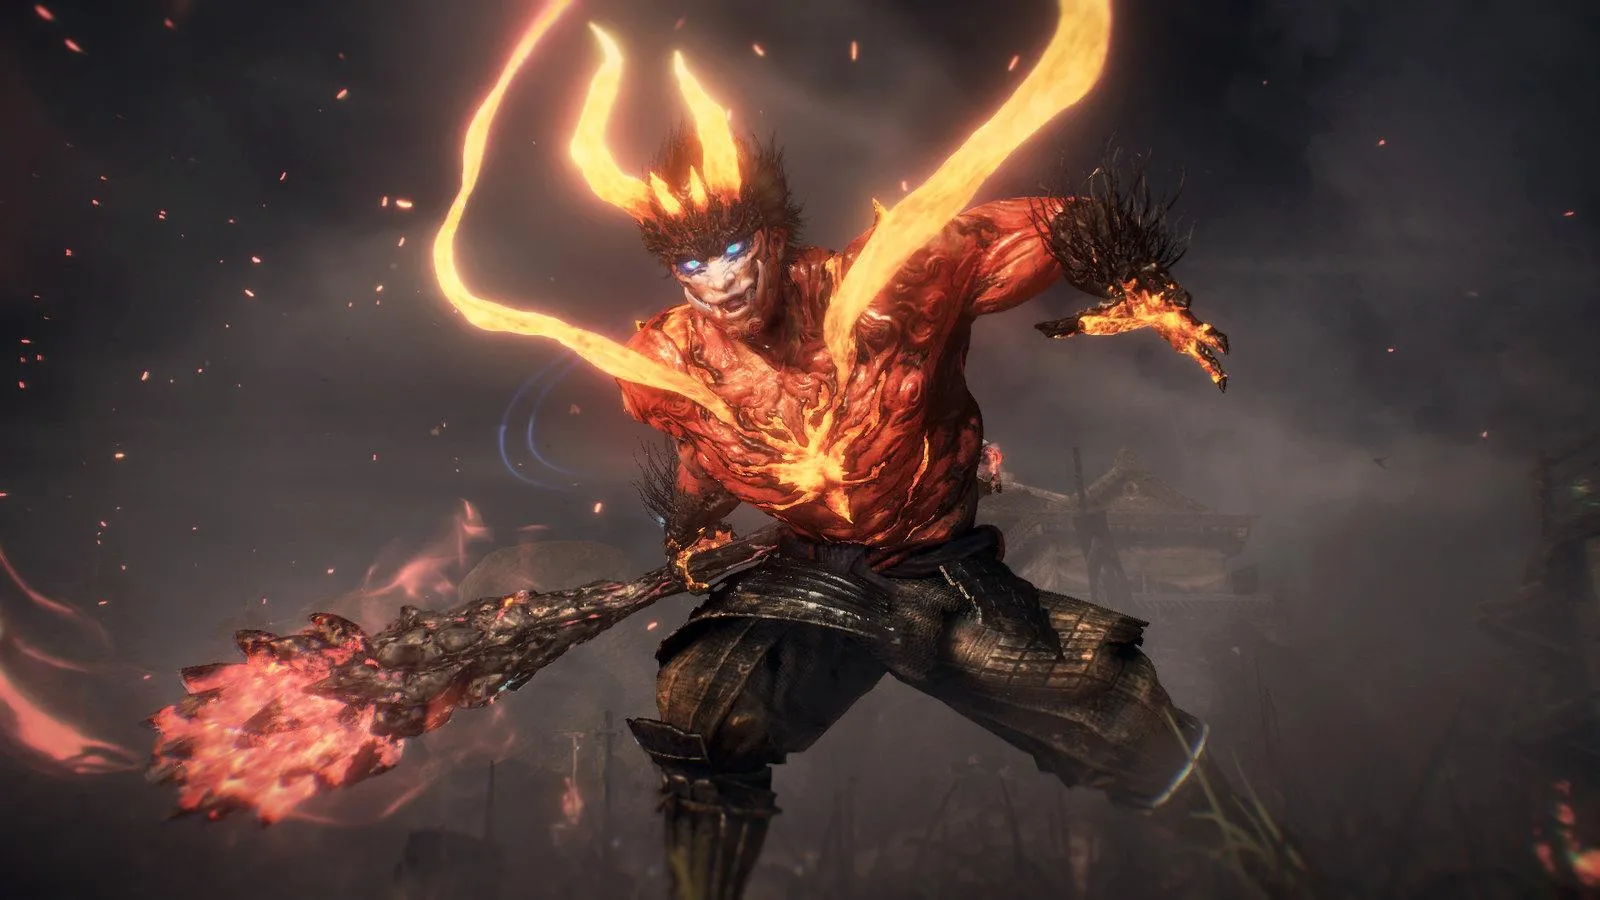 How To Beat The Final Boss In Nioh 2 - Guide